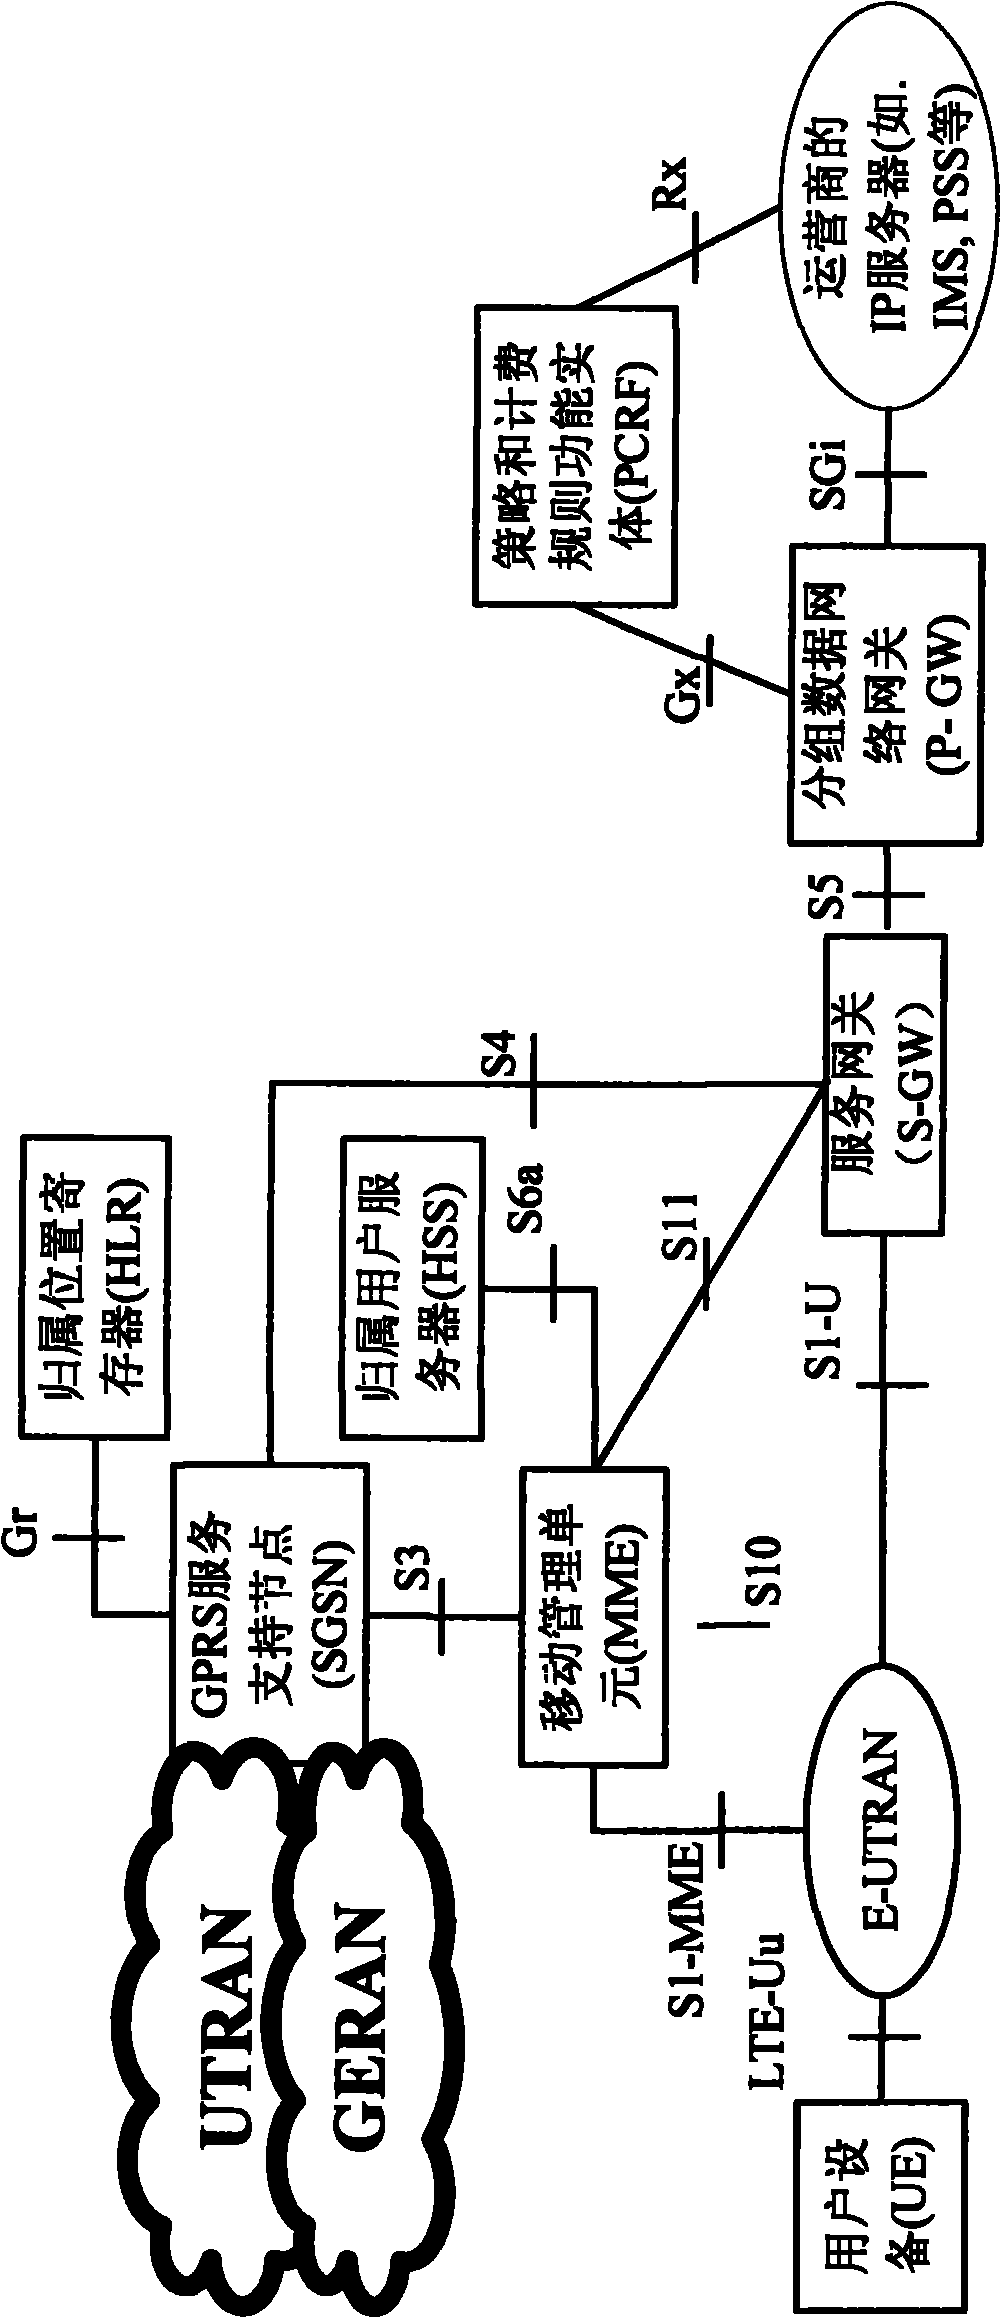 Routing redirection method and system for user information query